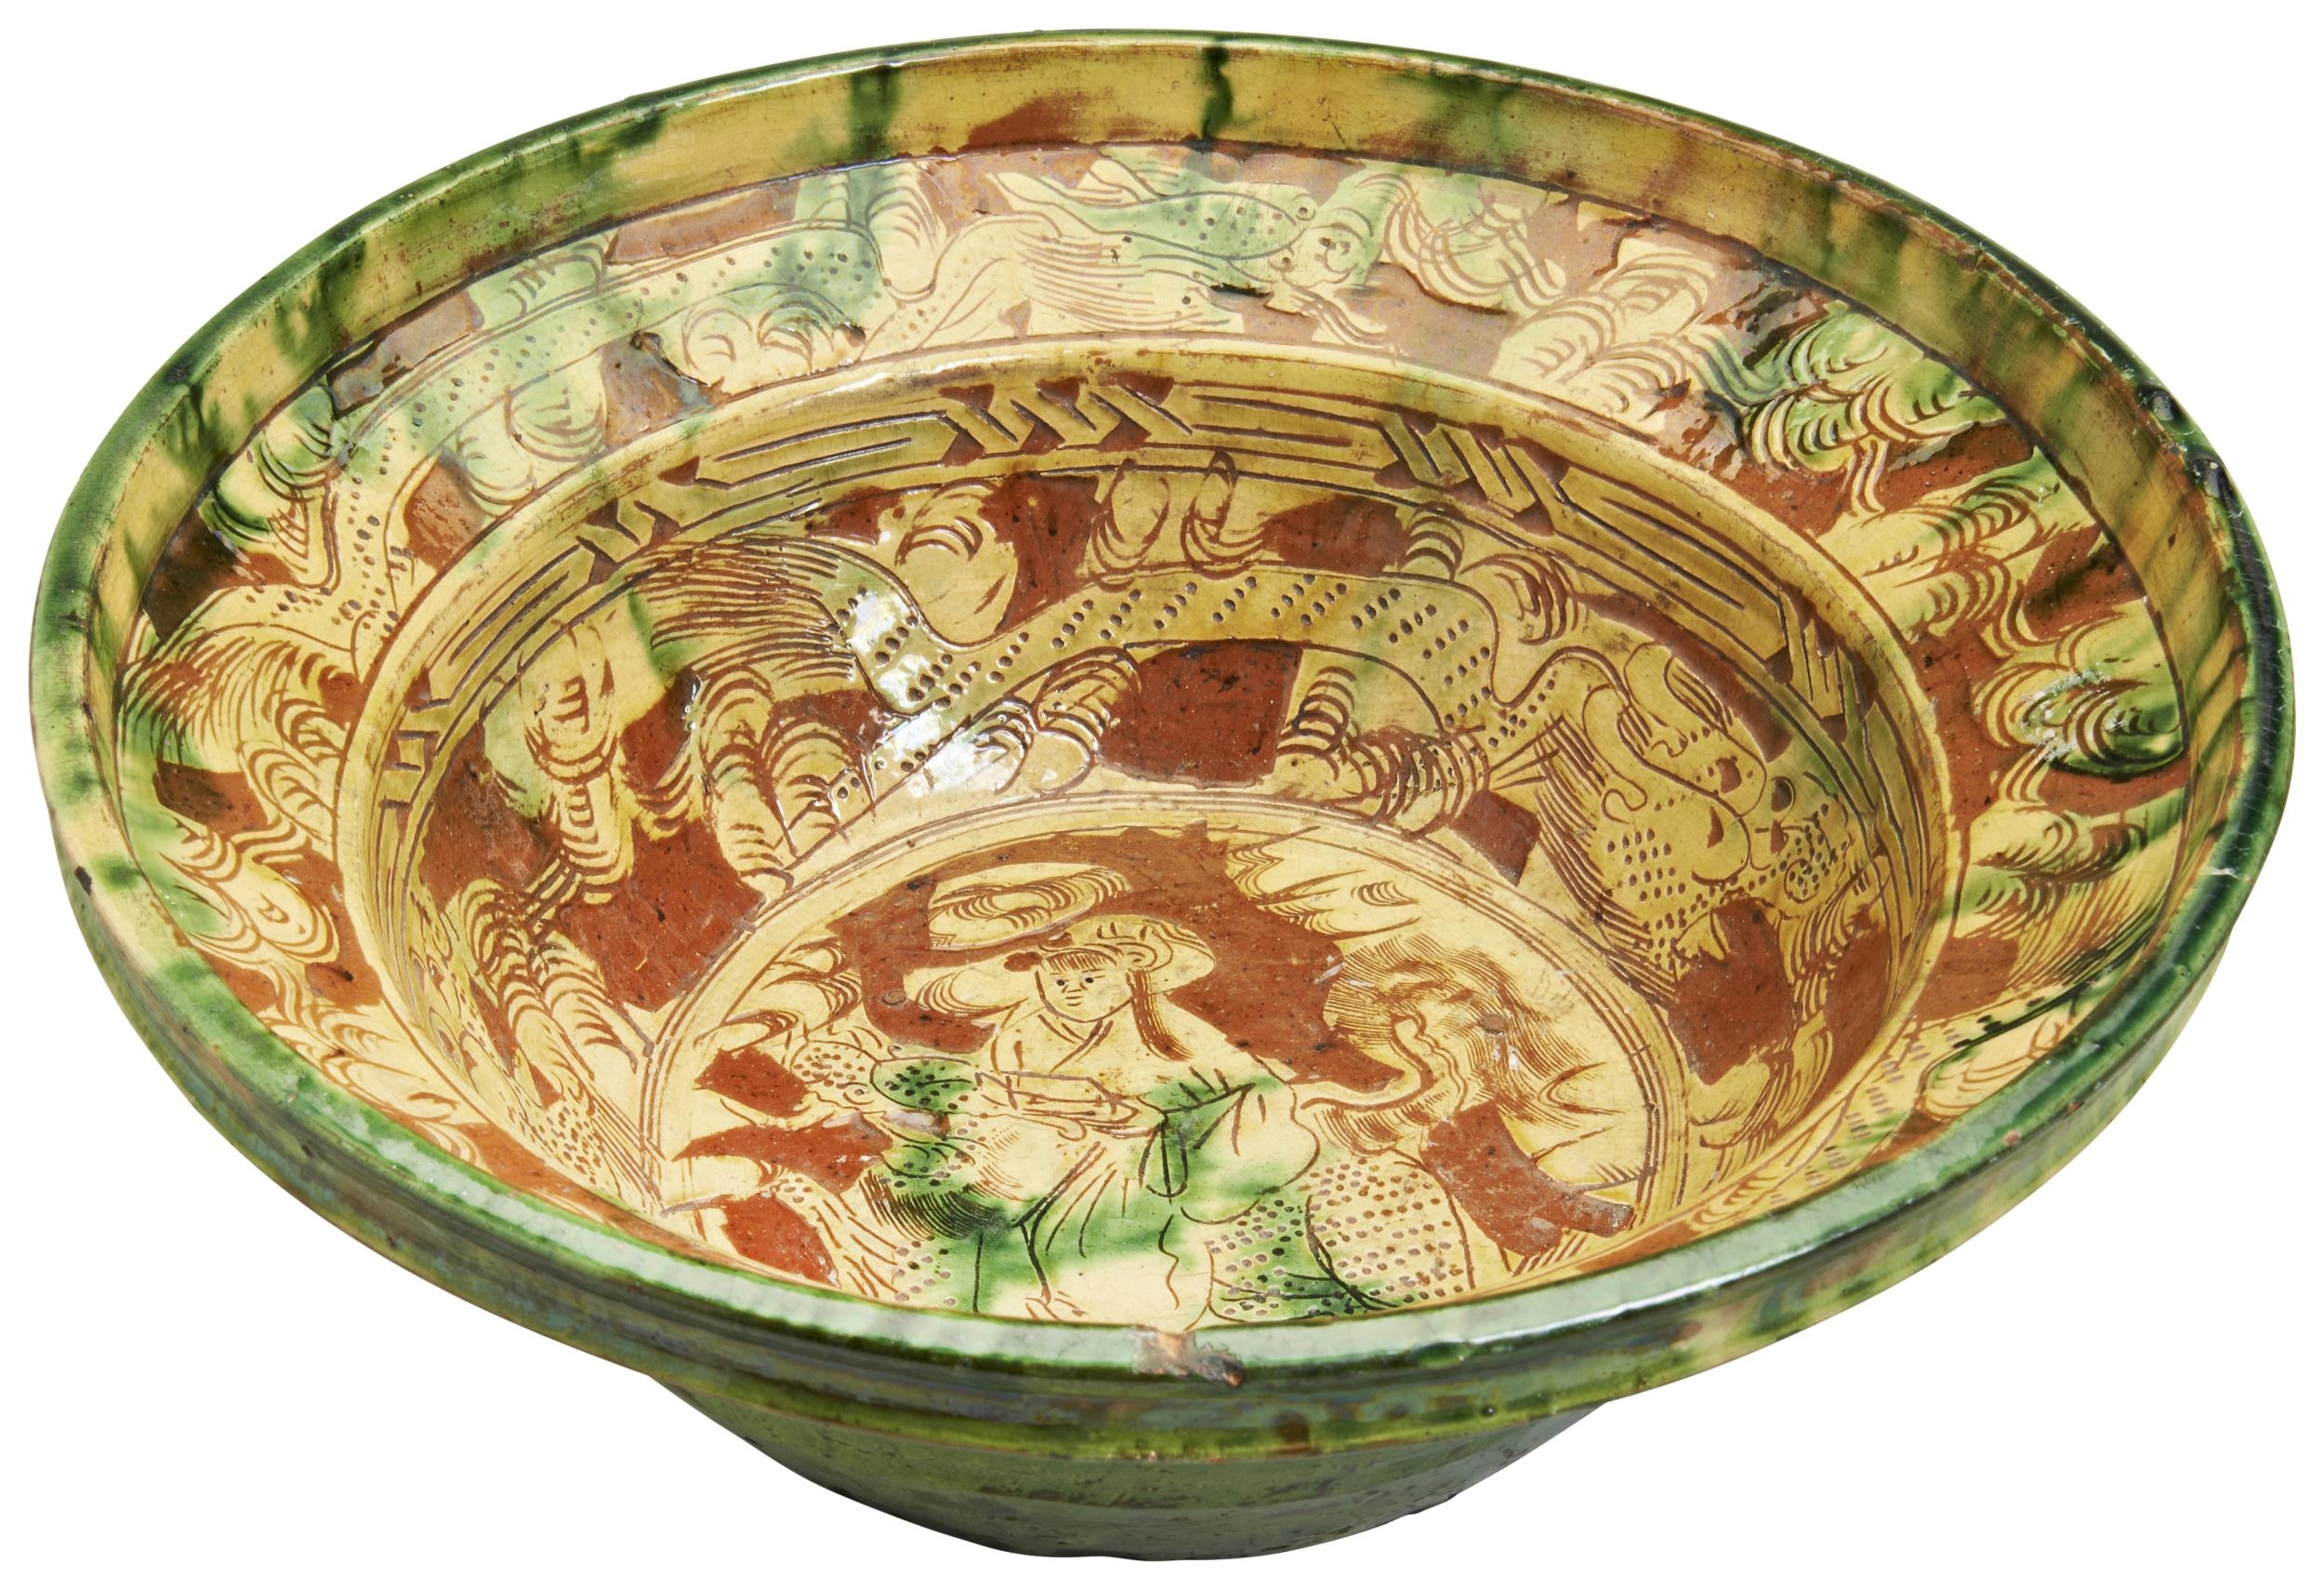 A LARGE SANCAI GLAZED BOWL LATE MING DYNASTY in the Persian-style, decorated with stylised dragons